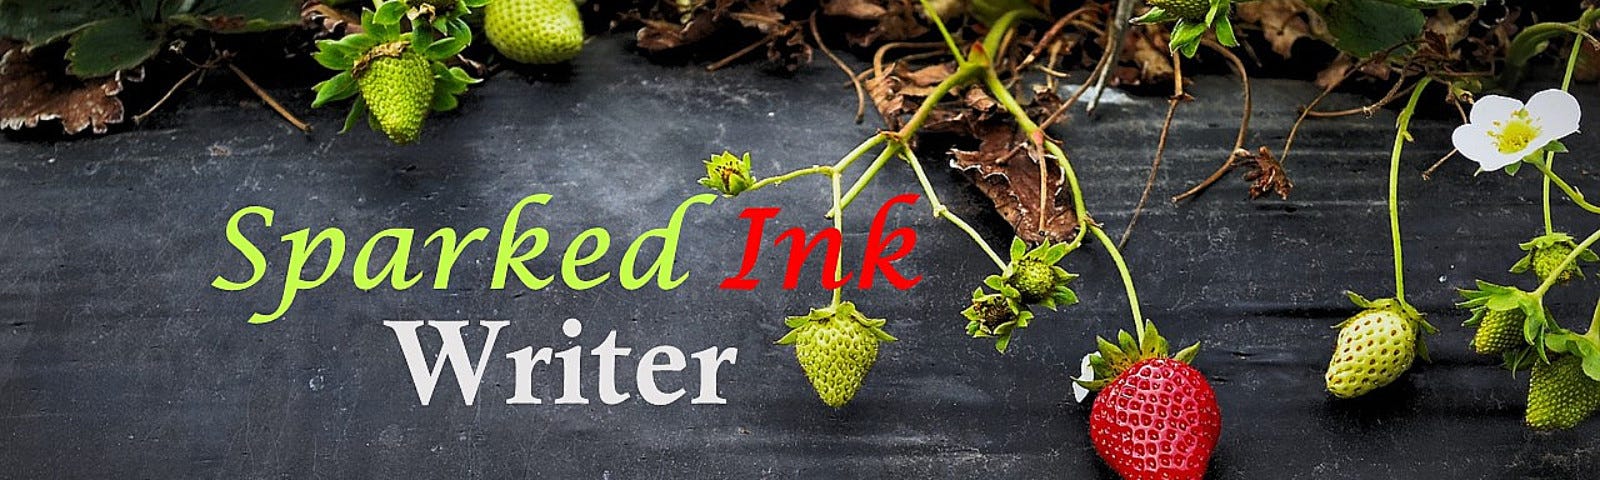 Strawberrry plants with green unripened strawberries and a single red strawberry draped over a slate grey beam. The words, ‘Sparked Ink Writer are overlaid in the centre left of the image.